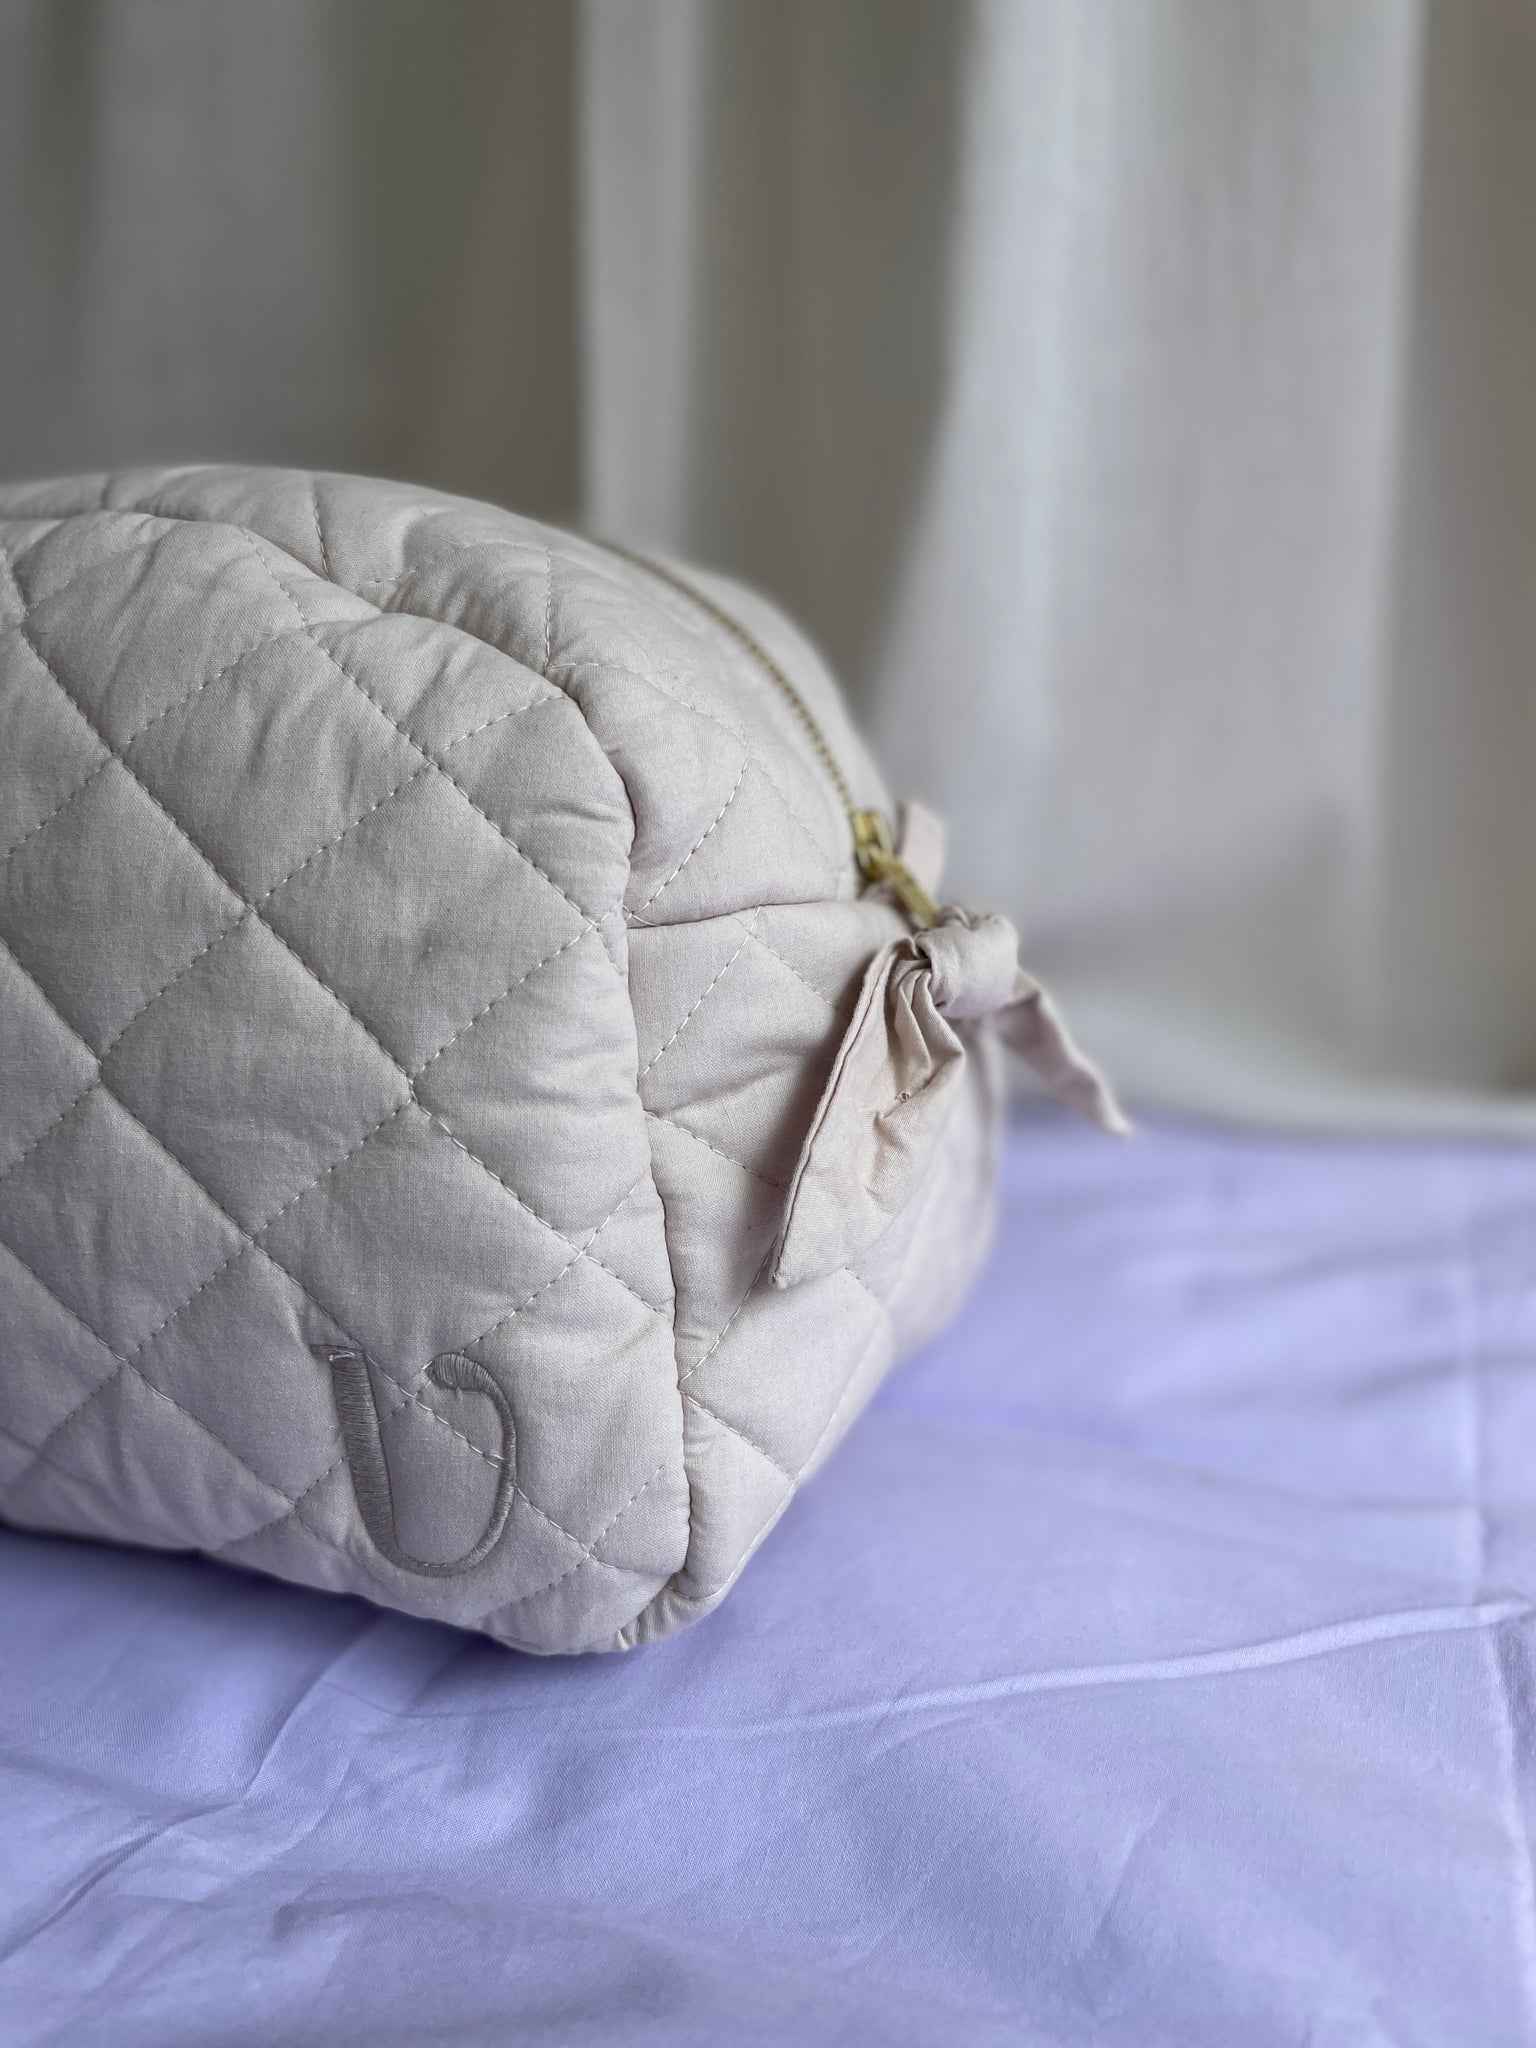 Quilted Toiletry Bag Oyster Grey Organic